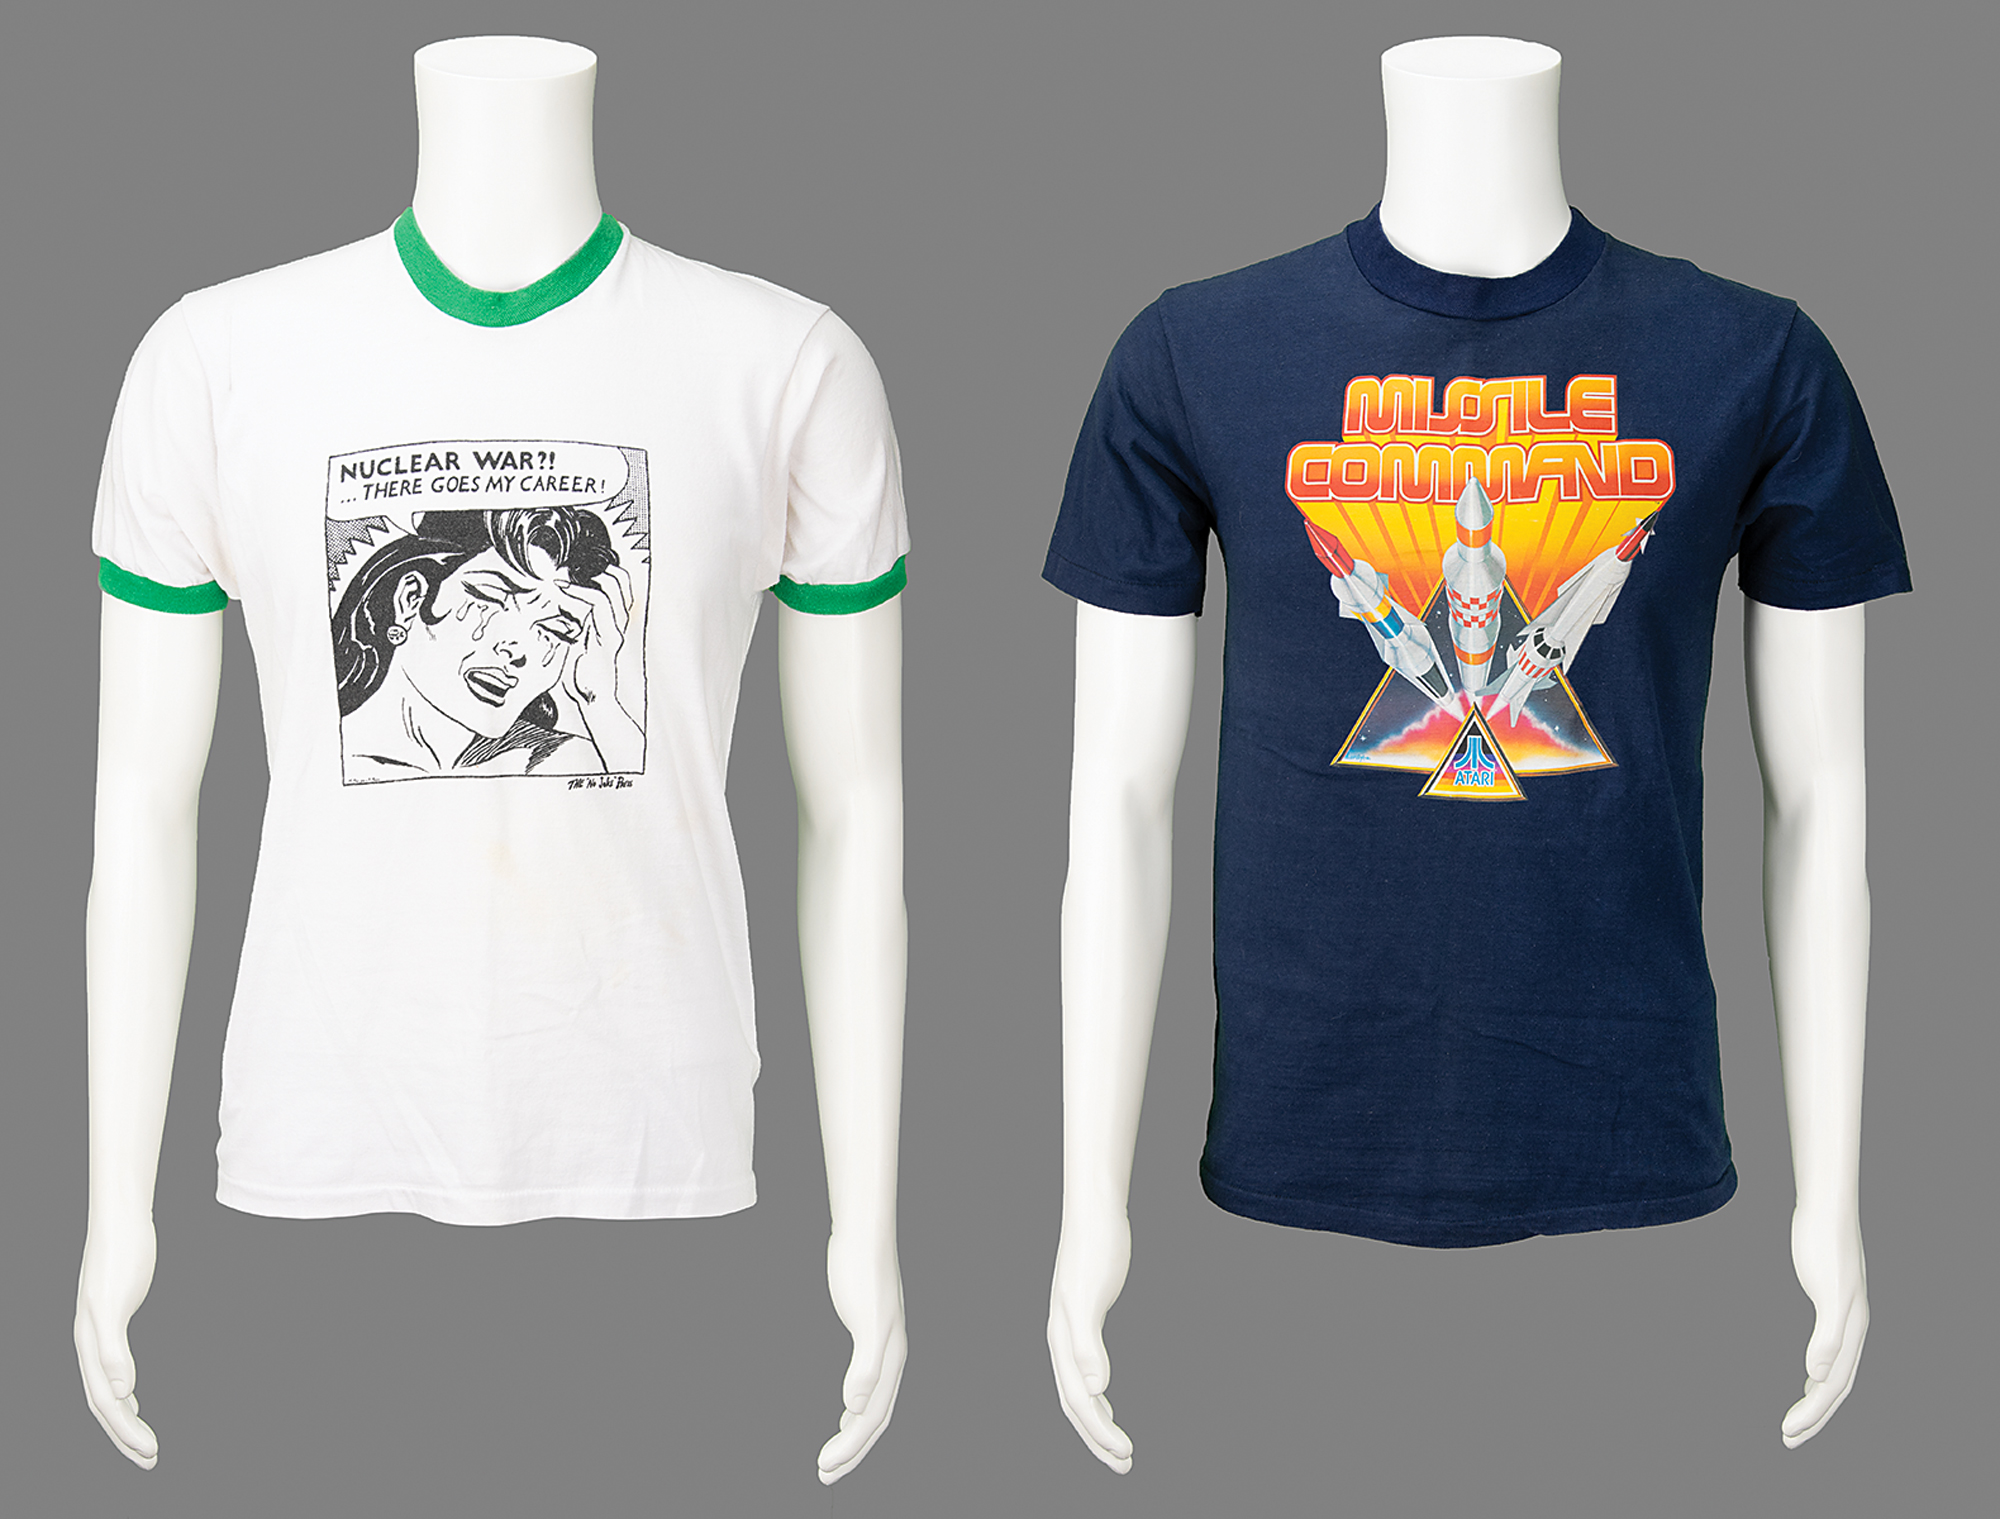 Lot #320 Atari 'Missile Command' and 'Nuclear War' T-Shirts (c. 1980) from the collection of David Sherman